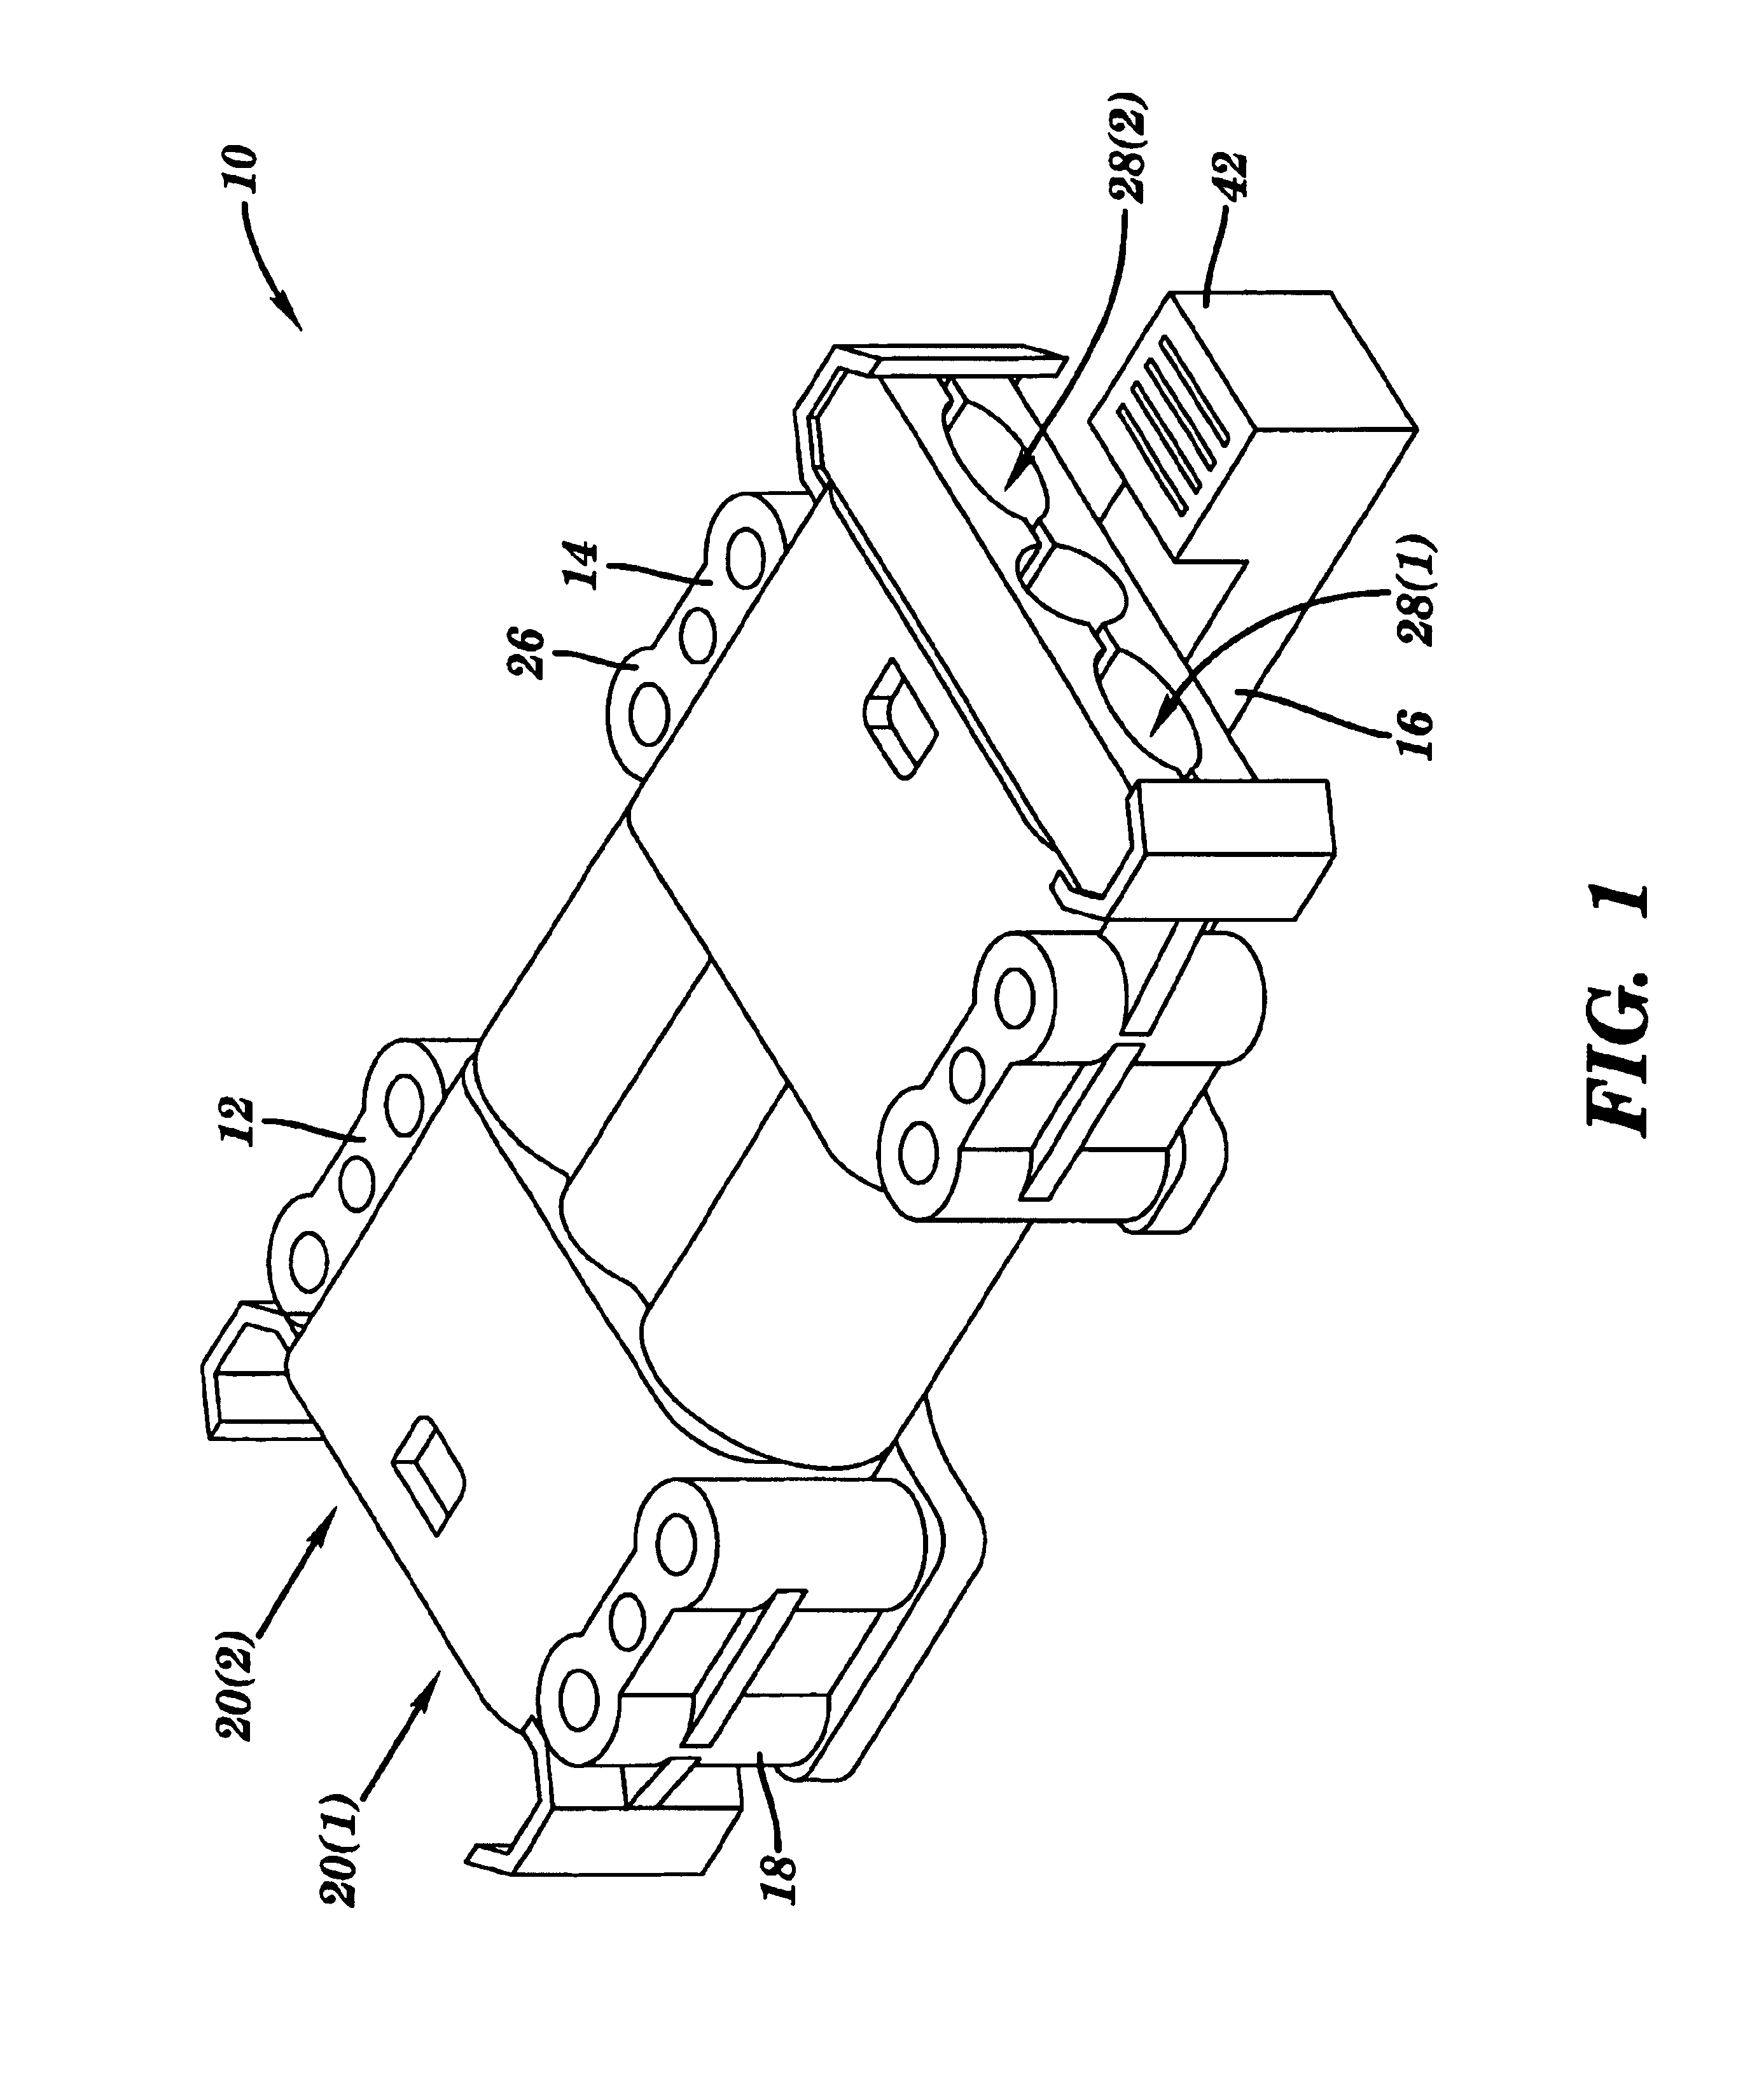 Plate locking system for mated electrical connectors and methods thereof